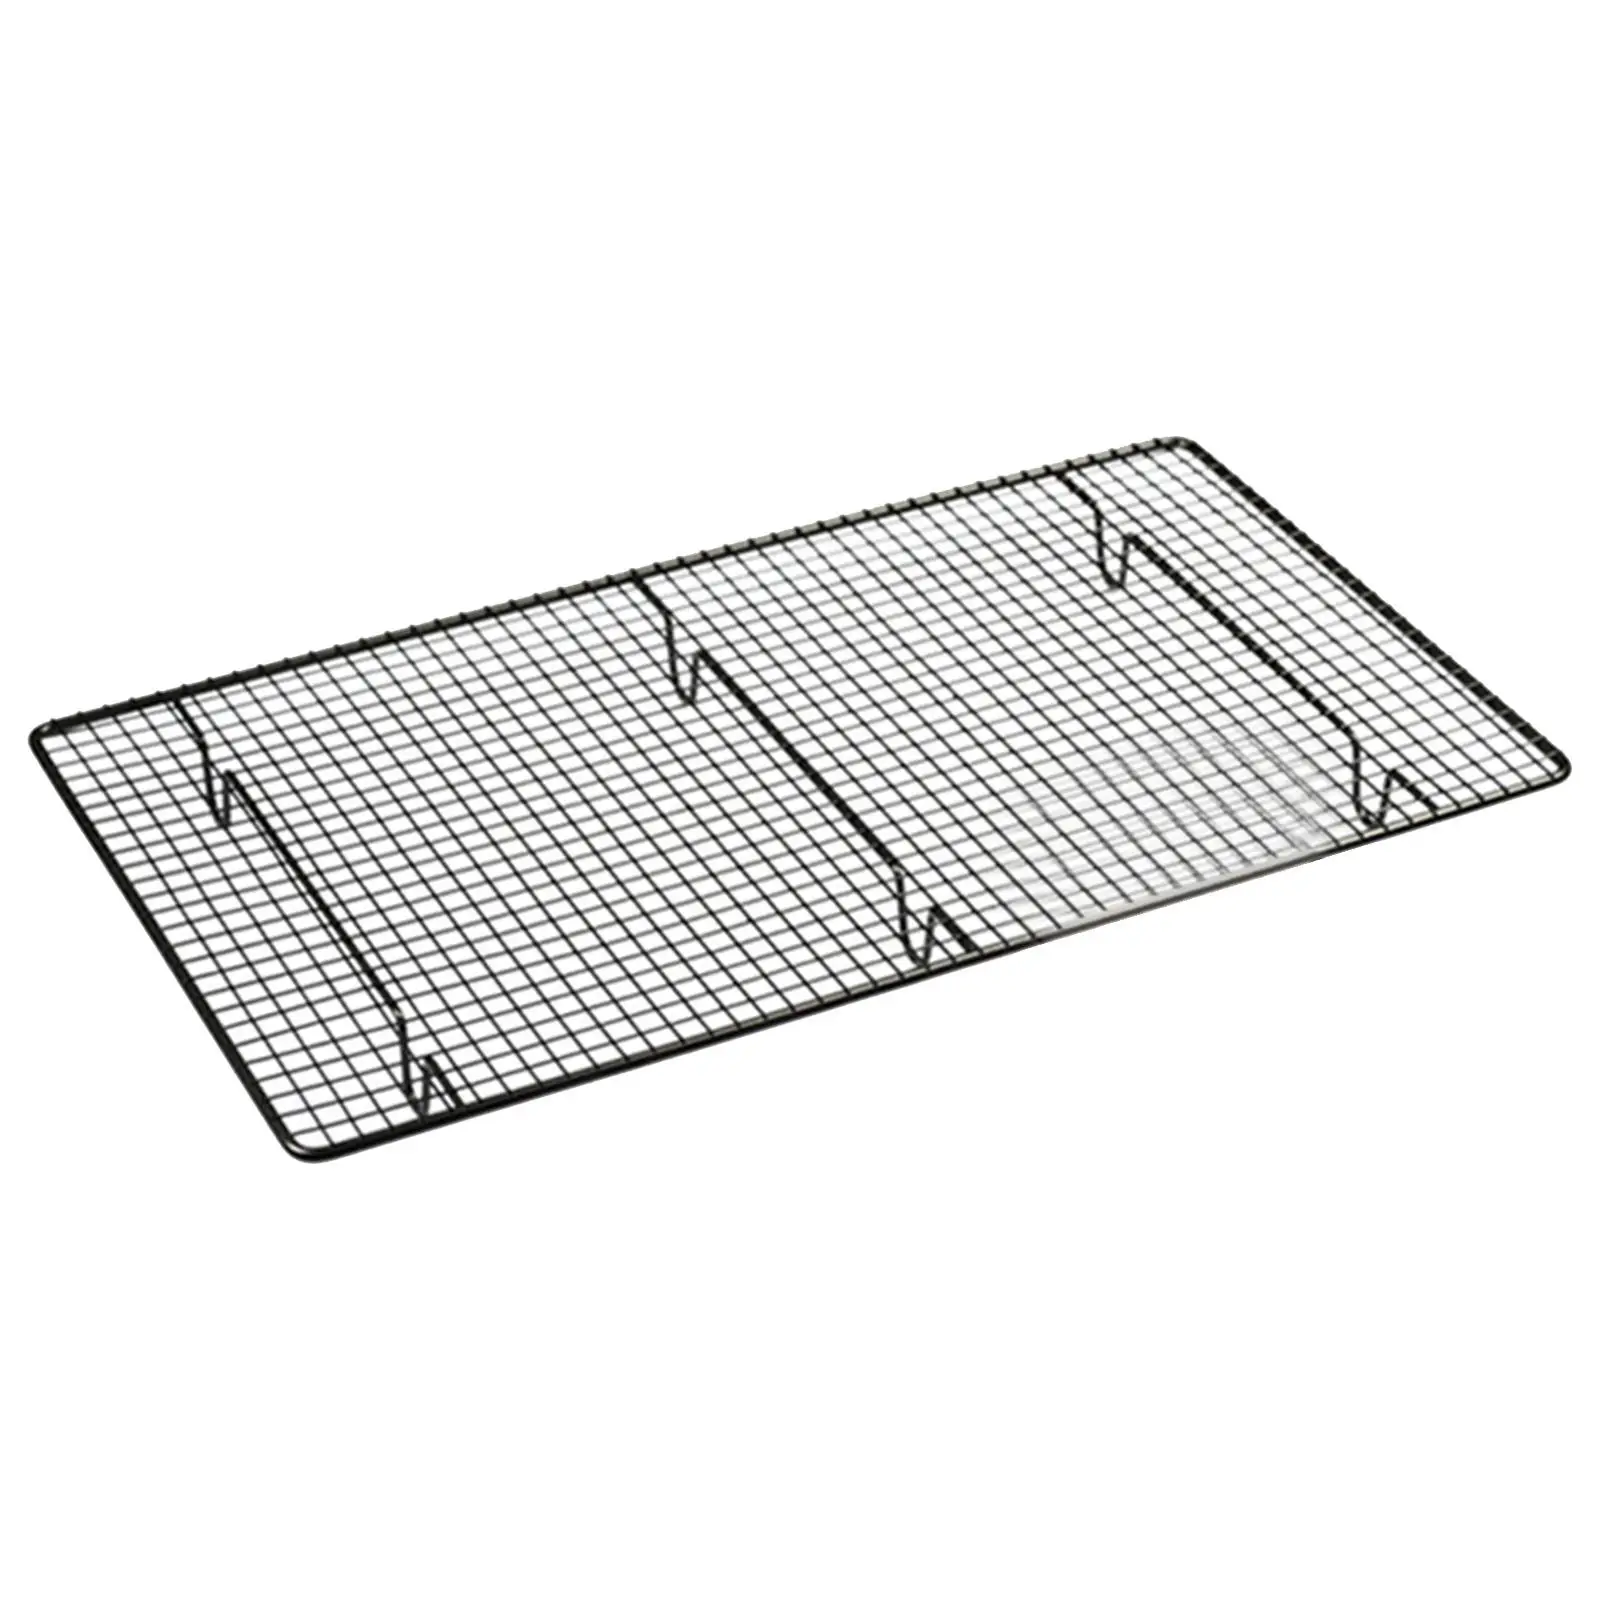 Baking Tool Outdoor Wire Nets Cook Baking Picnic Nonstick Cooking Grate Cold Drying Net Multifunctional Grid Cooling Tray